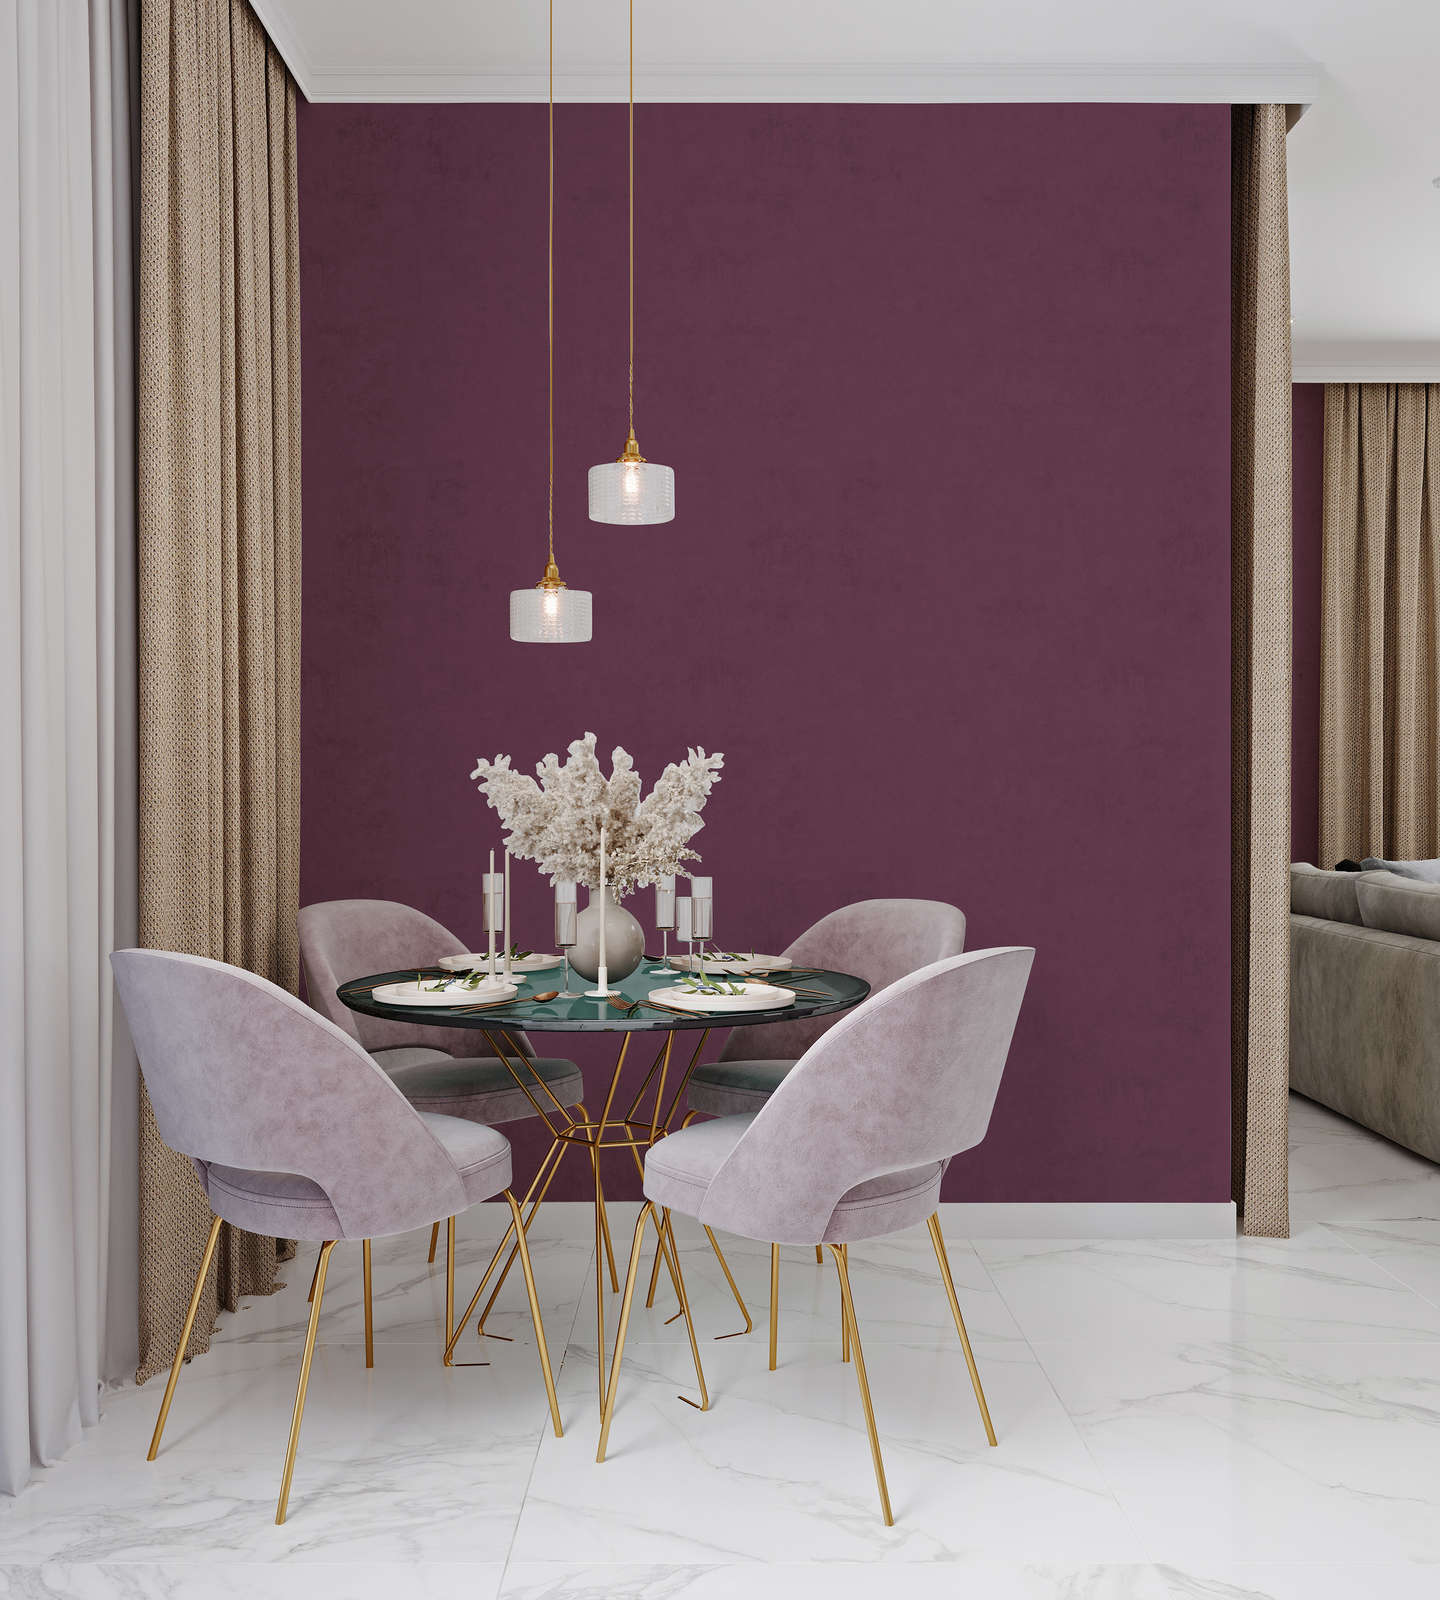             Premium Wall Paint strong berry »Beautiful Berry« NW212 – 1 litre
        